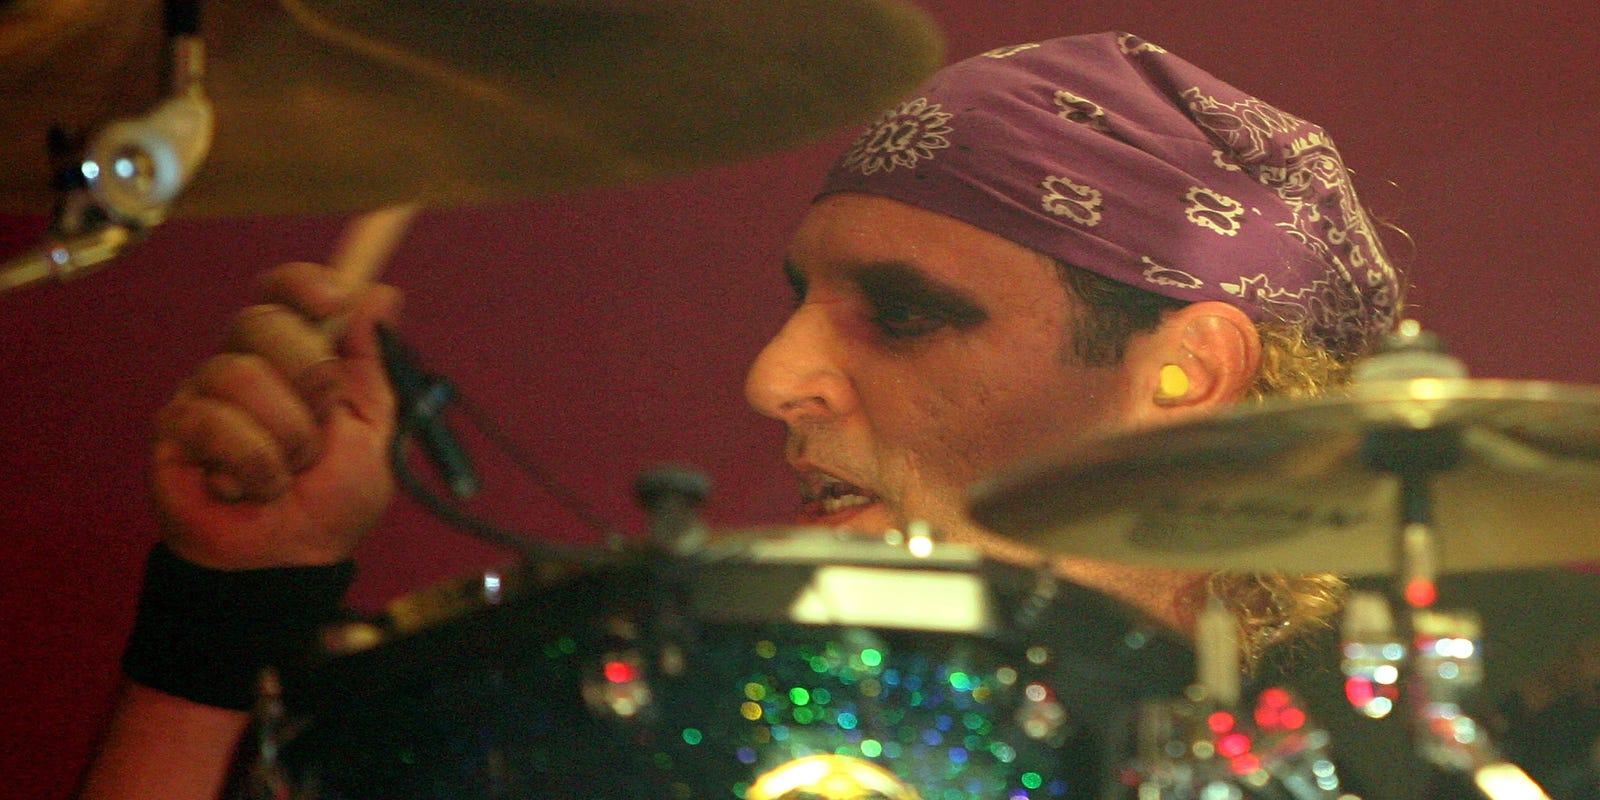 Bro Sis See Sexy Vedio Attak Sex - Twisted Sister drummer dies of apparent heart attack at 55